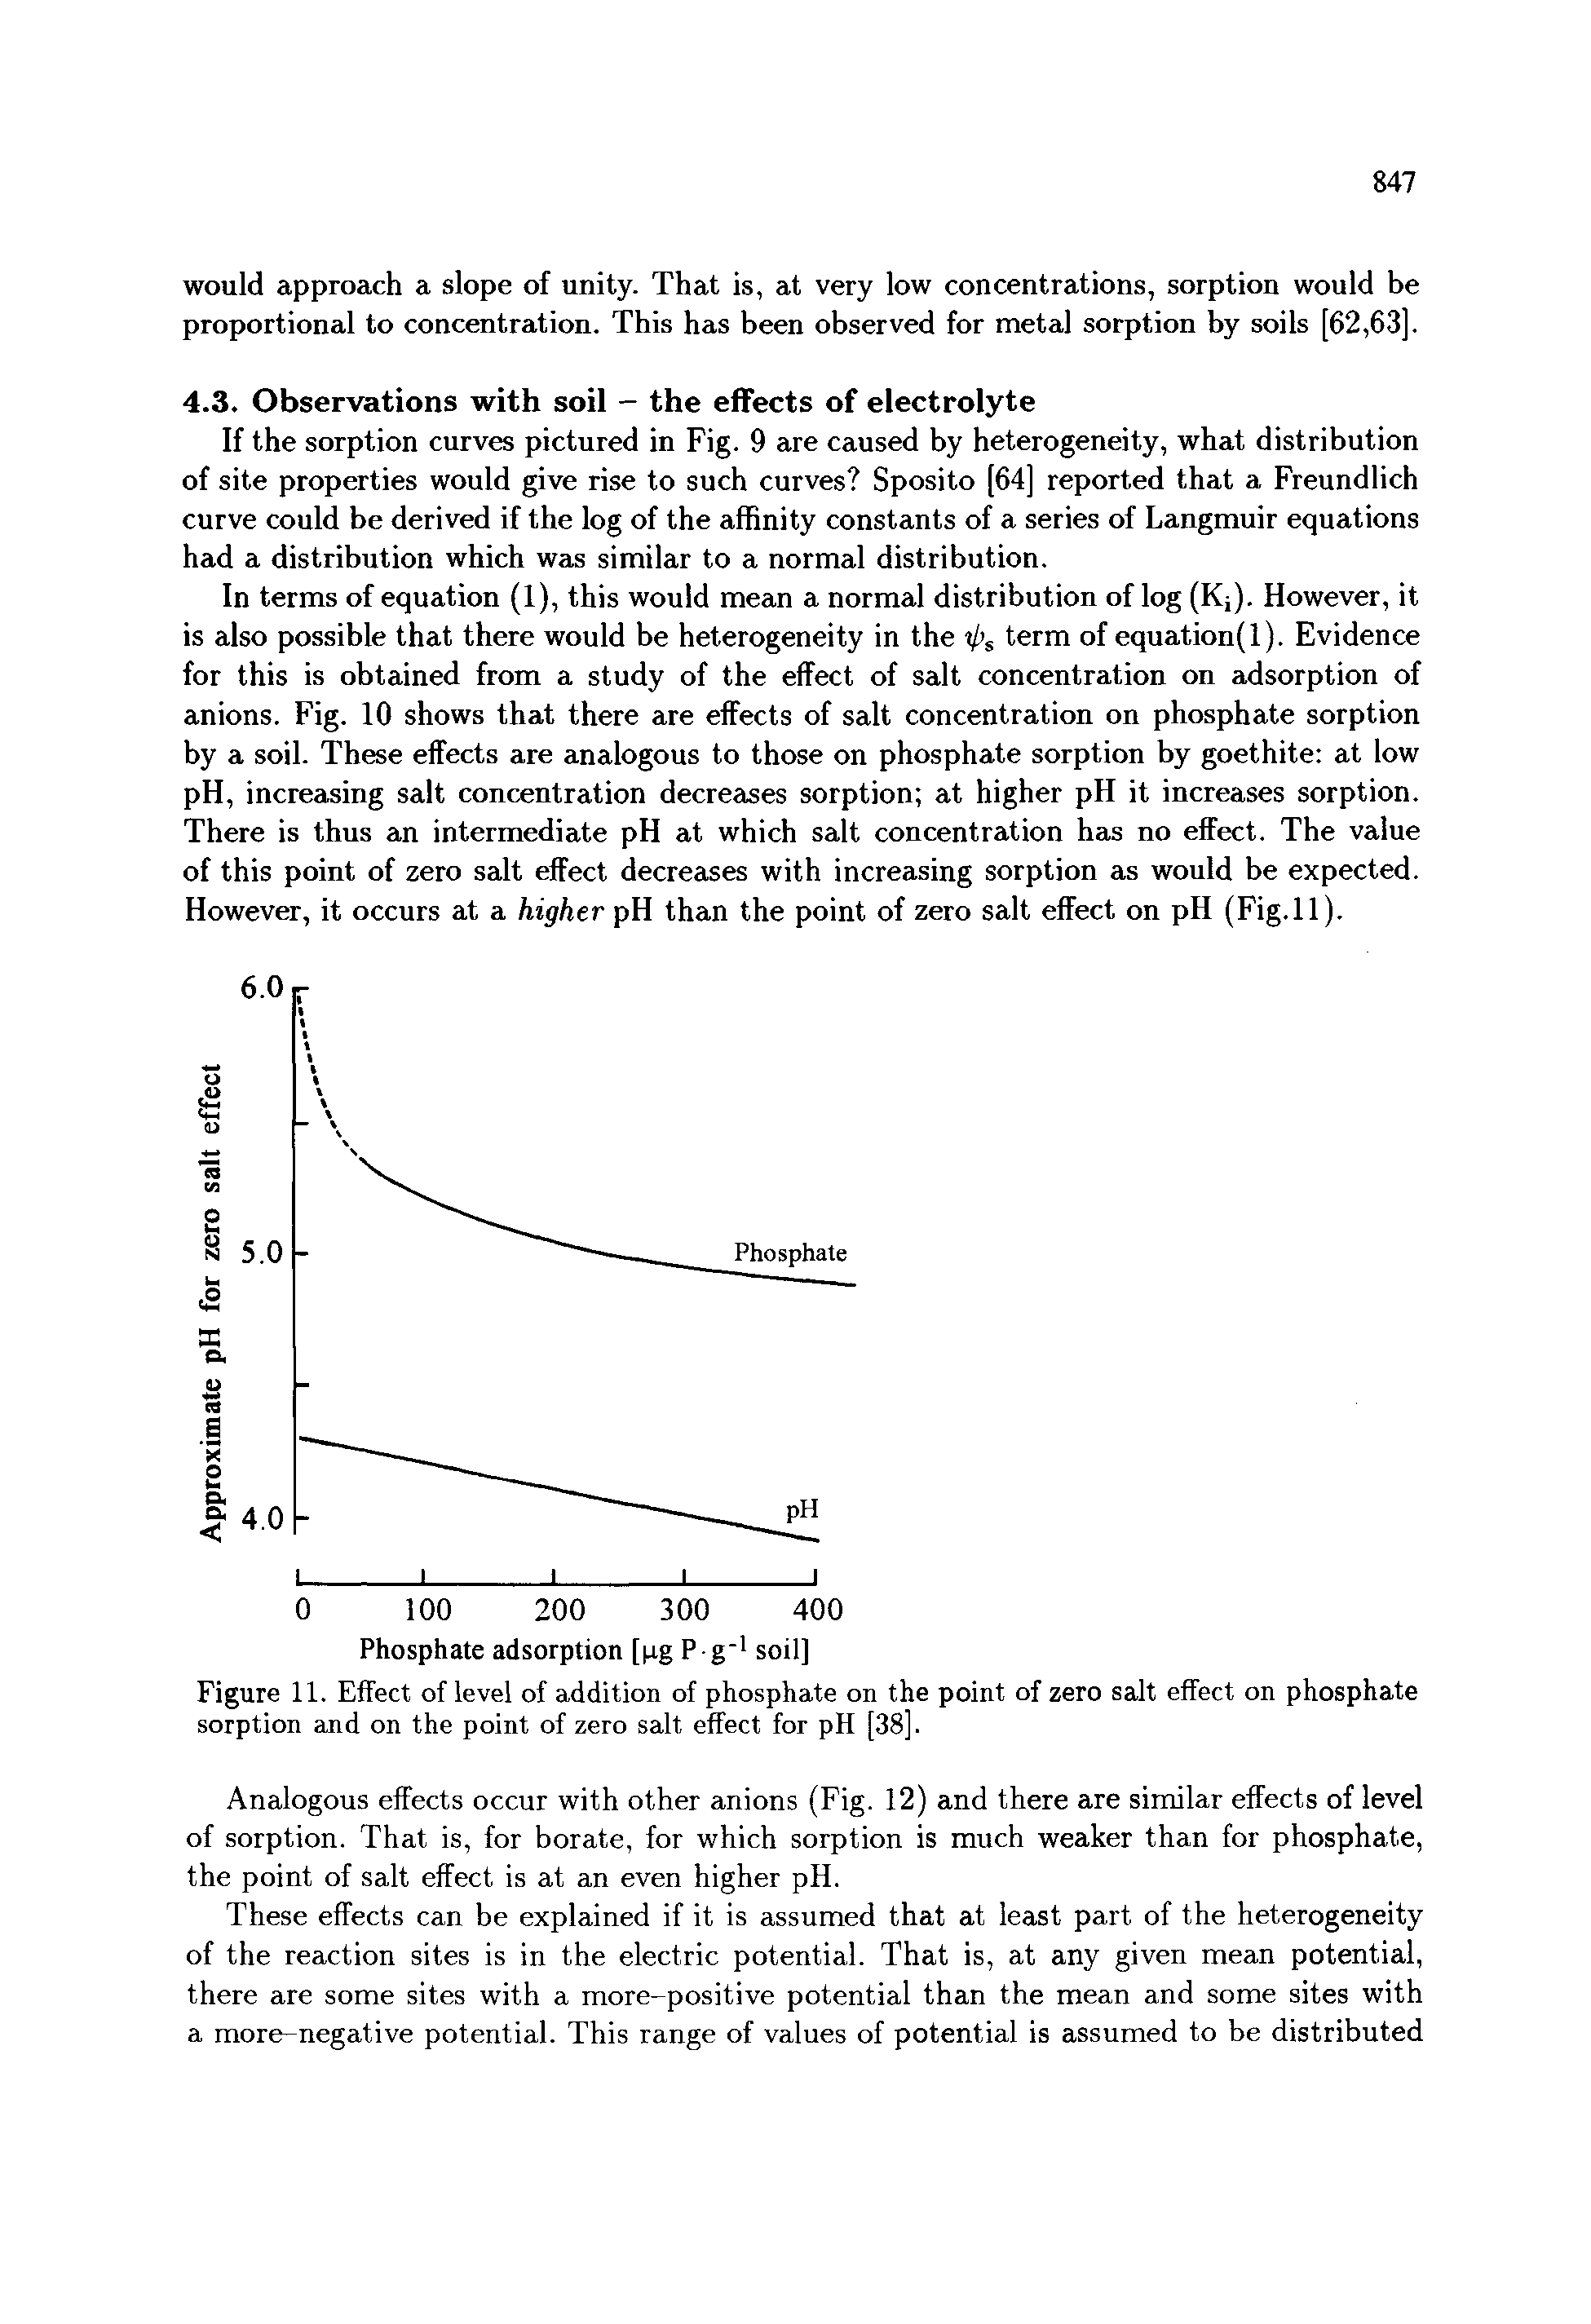 Figure 11. Effect of level of addition of phosphate on the point of zero salt effect on phosphate sorption and on the point of zero salt effect for pH [38].